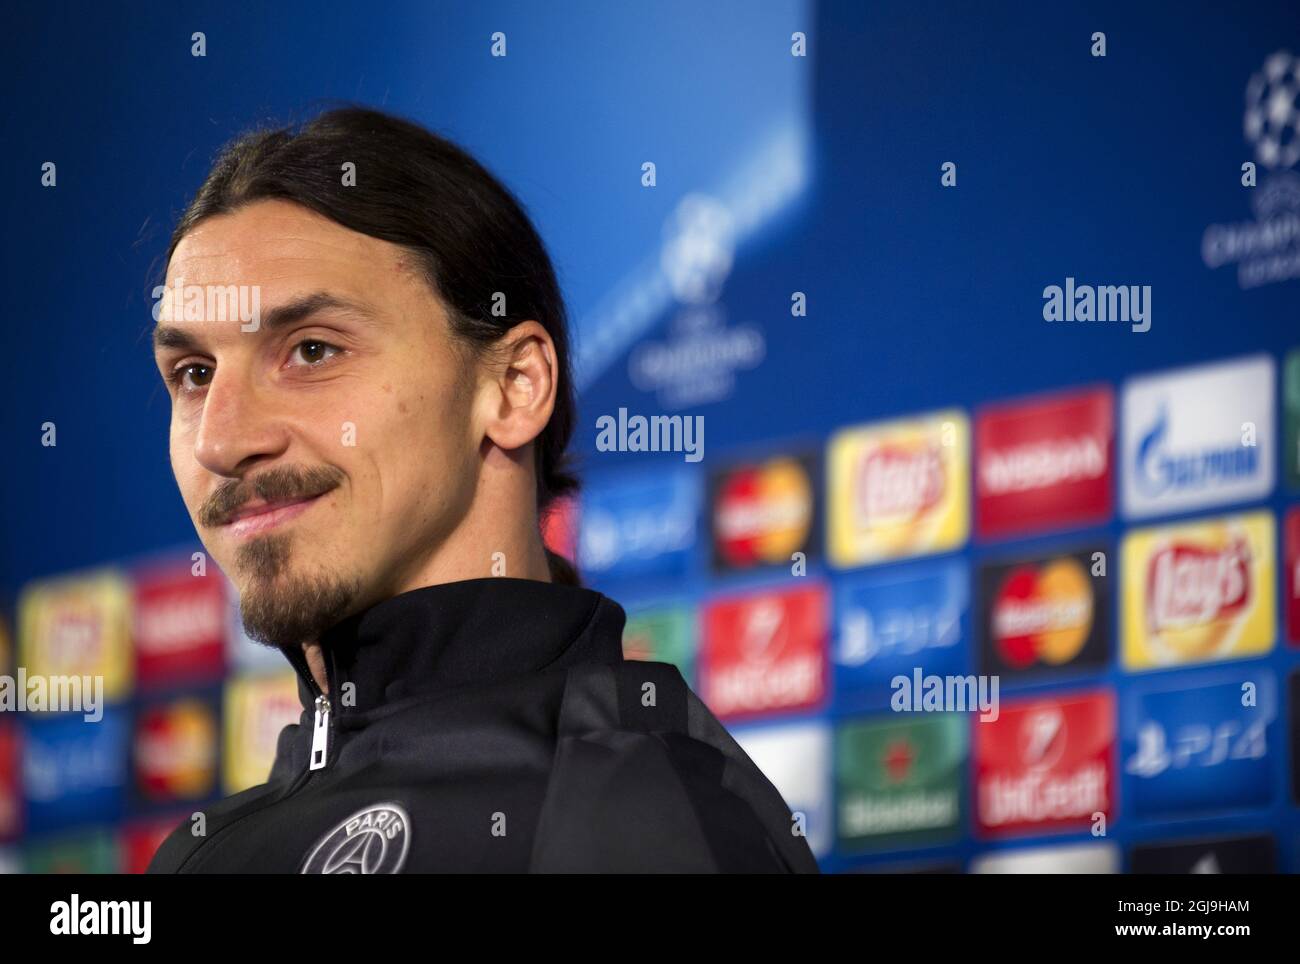 MALMO 2015-11-24 PSG team captain Zlatan Ibrahimovic during the presser the Malmo New Stadium in Malmo, Sweden, November 24, 2015. Paris Saint-Germain (PSG) will play against Malmo FF in the UEFA Champions League Group A in Malmo Wednesday. Photo Bjorn Lindgren / TT / Kod 75314 Stock Photo